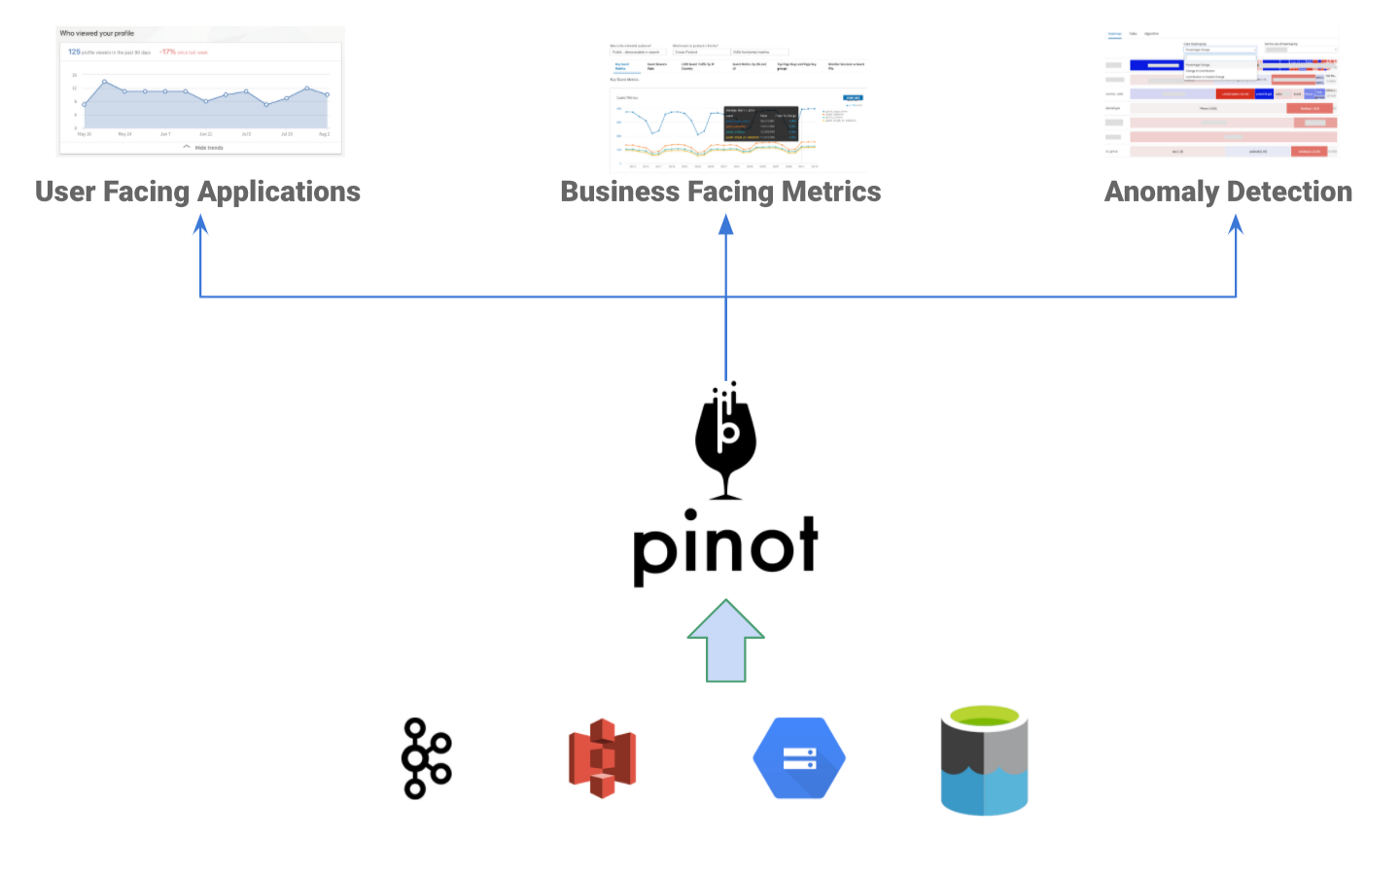 Apache Pinot for user-facing applications, business facing metrics, and anomaly detection